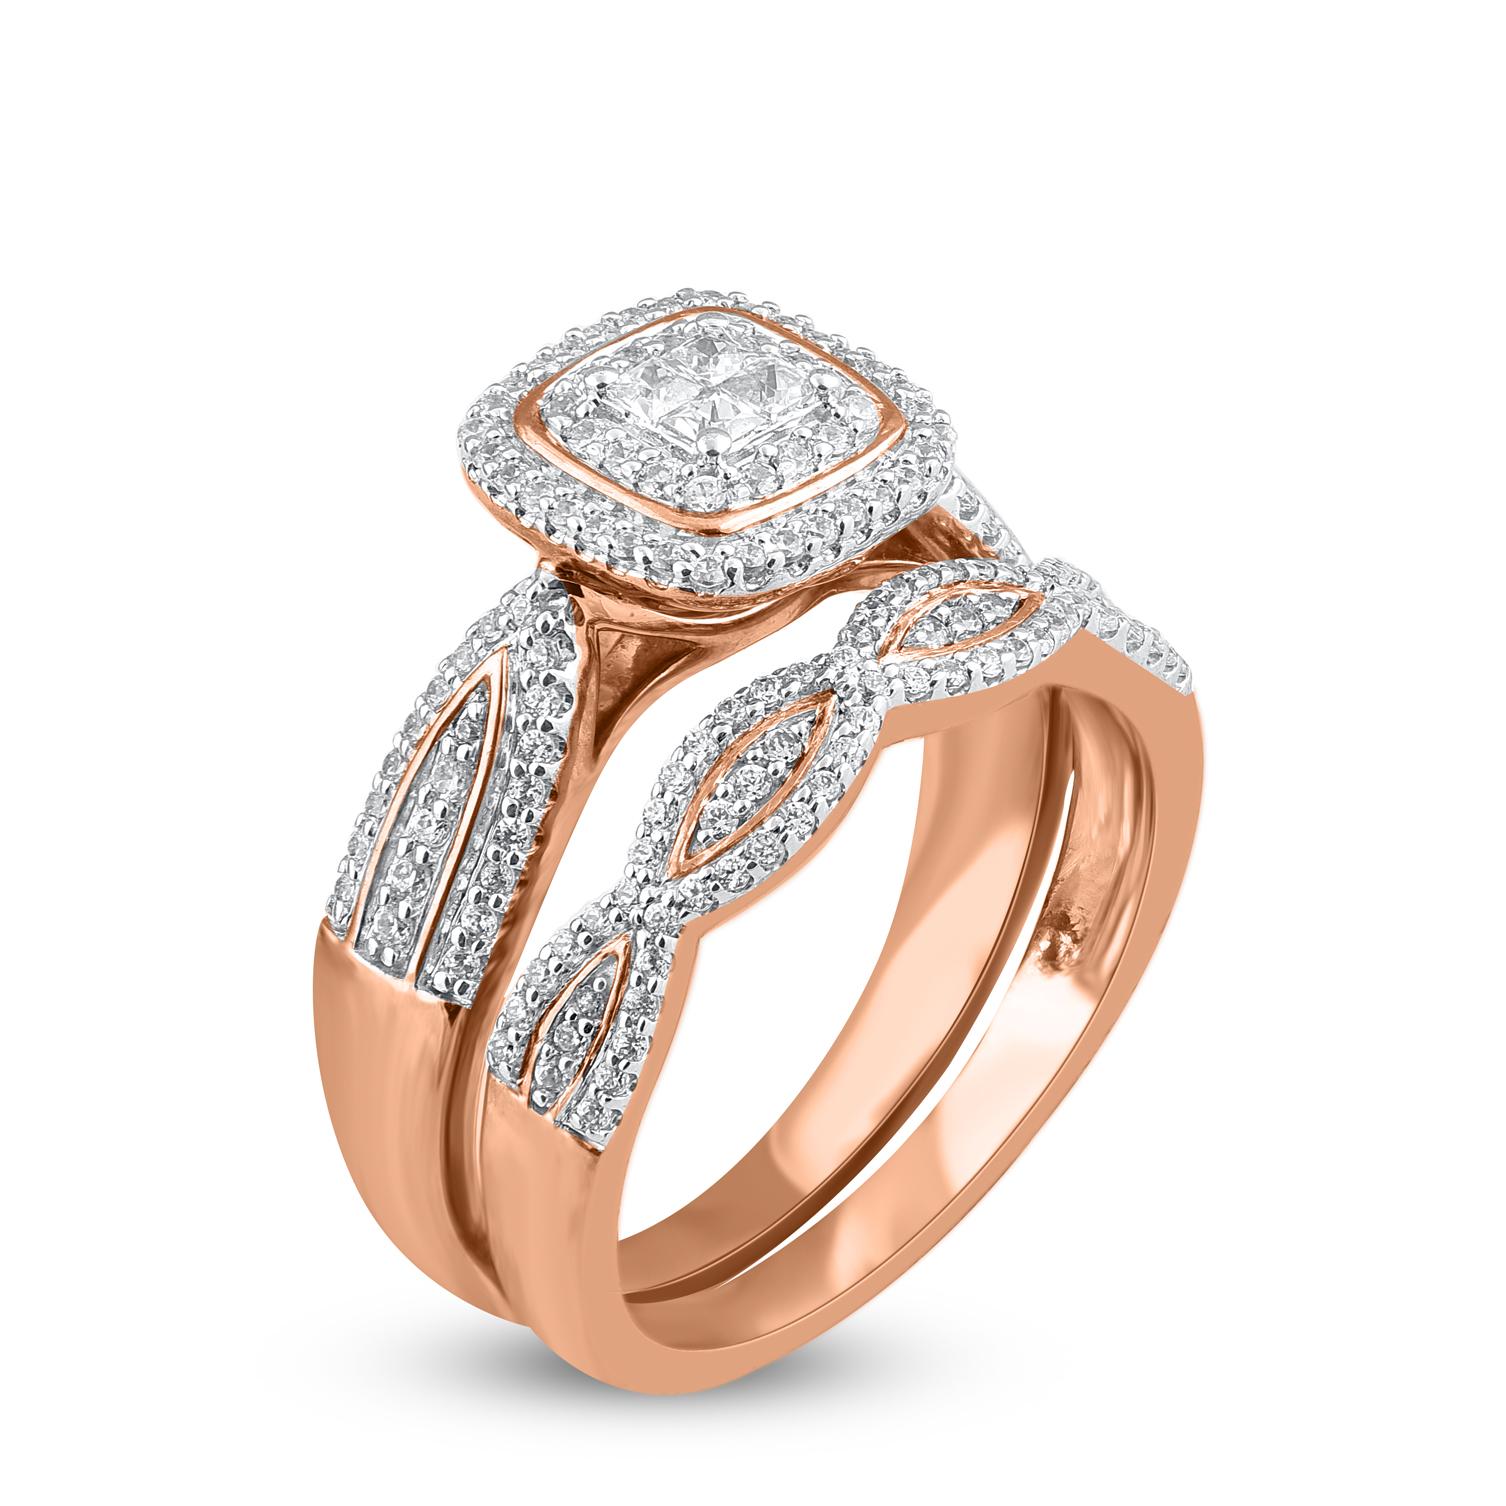 Contemporary TJD 0.65 Carat Round and Princess Cut Diamond 14KT Rose Gold Bridal Ring Set For Sale